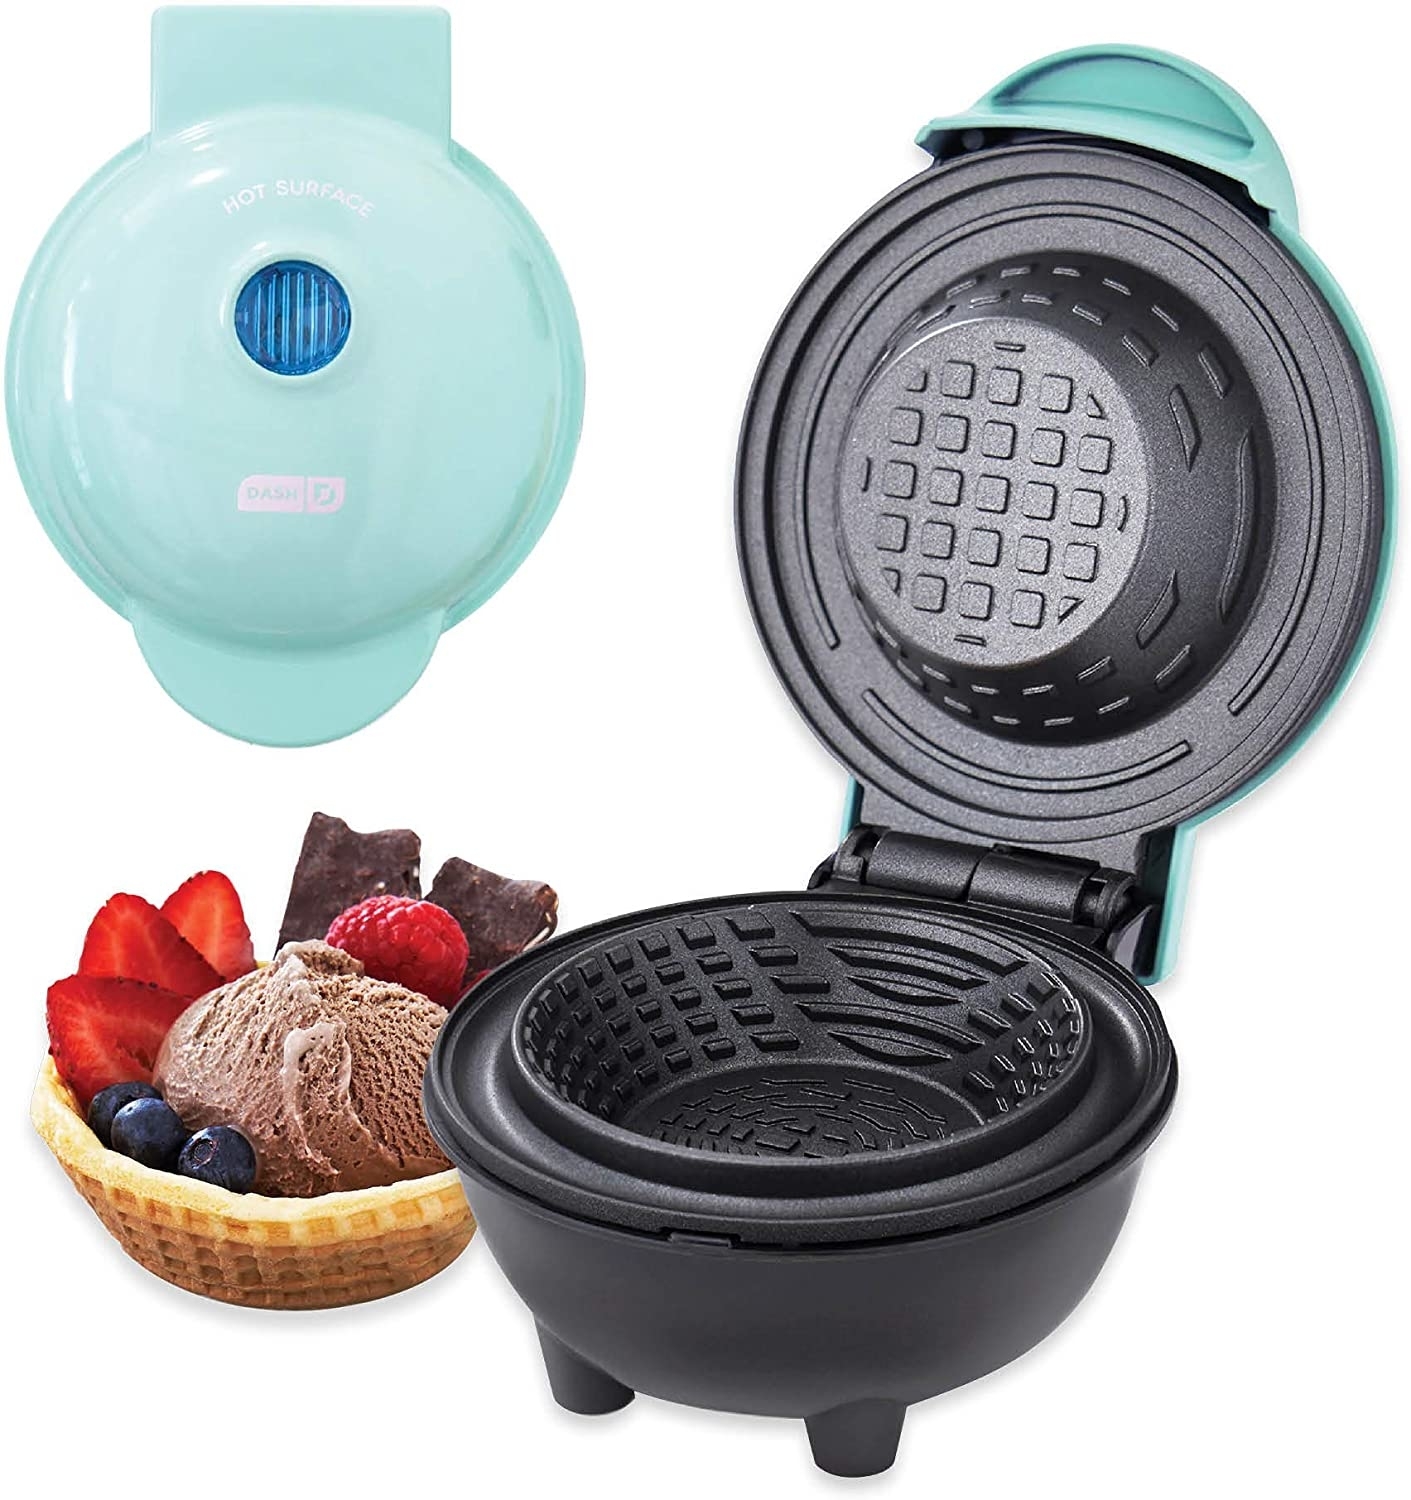 Waffle bowl maker next to a waffle bowl filled with ice-cream and fruit